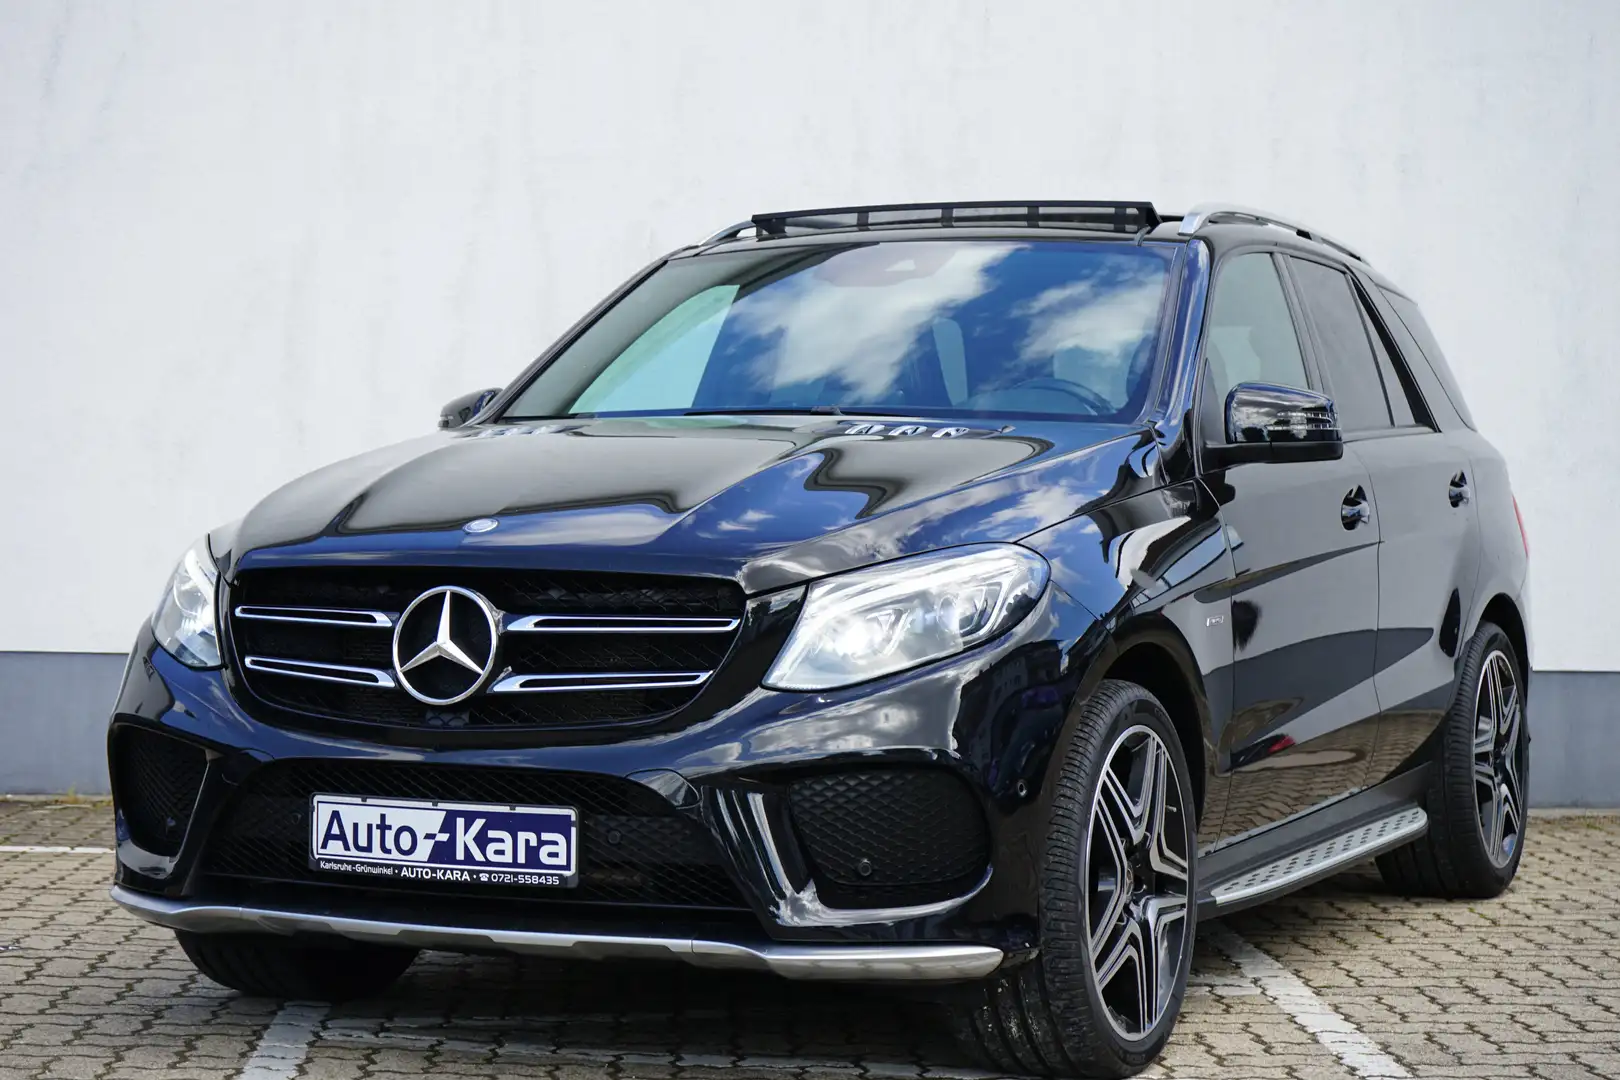 Mercedes-Benz GLE 450 4MATIC*21 Zoll*Panorama*LED ILS*Standheizung*Voll Noir - 1